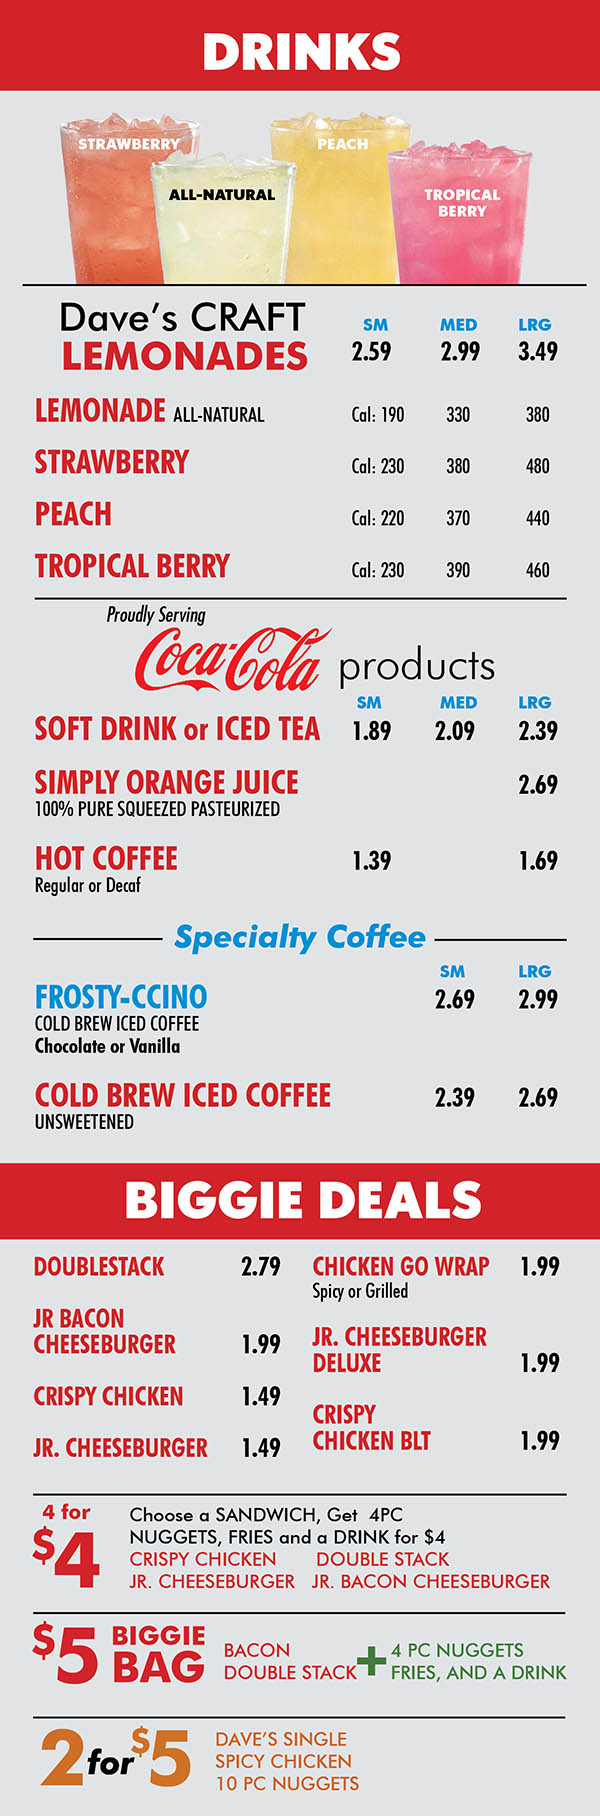 Wendy's N 48th St Lincoln NE Menu Page 5
DRINKS
STRAWBERRY
PEACH
ALL-NATURAL
TROPICAL
BERRY
Dave’s CRAFT SM MED LRG
LEMONADES 2.59 2.99 3.49 LEMONADE ALL-NATURAL Cal: 190 330 380
STRAWBERRY Cal: 230 380 480
PEACH Cal: 220 370 440
TROPICAL BERRY Cal: 230 390 460
Proudly Serving
products
SM MED LRG
SOFT DRINK or ICED TEA 1.89 2.09 2.39
SIMPLY ORANGE JUICE 2.69
100% PURE SQUEEZED PASTEURIZED
HOT COFFEE 1.39 1.69
Regular or Decaf
Specialty Coffee
SM LRG
FROSTY-CCINO 2.69 2.99
COLD BREW ICED COFFEE
Chocolate or Vanilla
COLD BREW ICED COFFEE 2.39 2.69
UNSWEETENED
BIGGIE DEALS
DOUBLESTACK 2.79 JR BACON CHEESEBURGER 1.99 CRISPY CHICKEN 1.49 JR. CHEESEBURGER 1.49
CHICKEN GO WRAP 1.99
Spicy or Grilled
JR. CHEESEBURGER
DELUXE 1.99
CRISPY
CHICKEN BLT 1.99
4 for
$4
Choose a SANDWICH, Get 4PC
NUGGETS, FRIES and a DRINK for $4
CRISPY CHICKEN DOUBLE STACK
JR. CHEESEBURGER JR. BACON CHEESEBURGER
$5
BIGGIE
BAG
BACON
DOUBLE STACK
+
4 PC NUGGETS
FRIES, AND A DRINK
2for$5
DAVE’S SINGLE
SPICY CHICKEN
10 PC NUGGETS